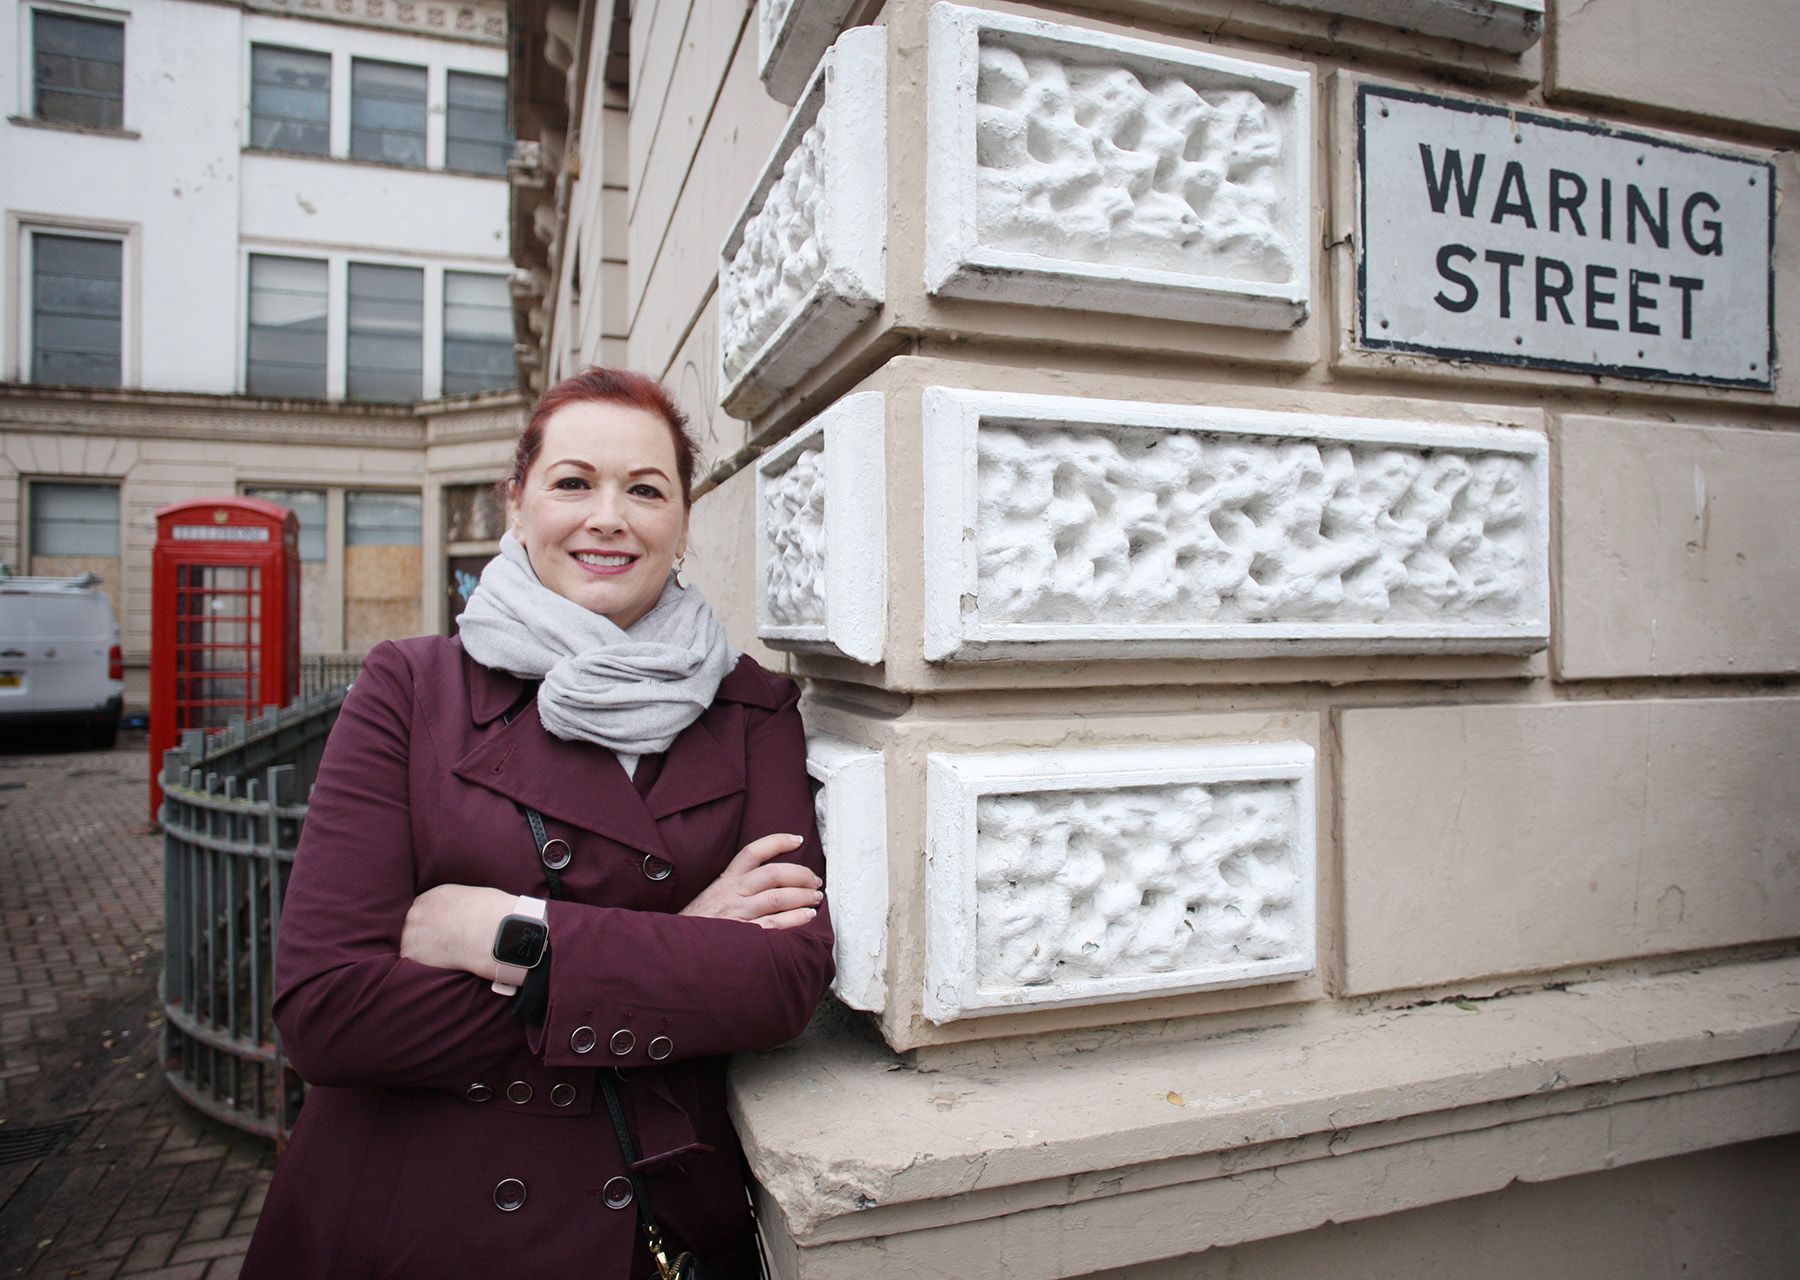 BELFAST VISIT: Catherine Mulawka was in Belfast to walk in the footsteps of her legendary ancestor, Wolfe Tone